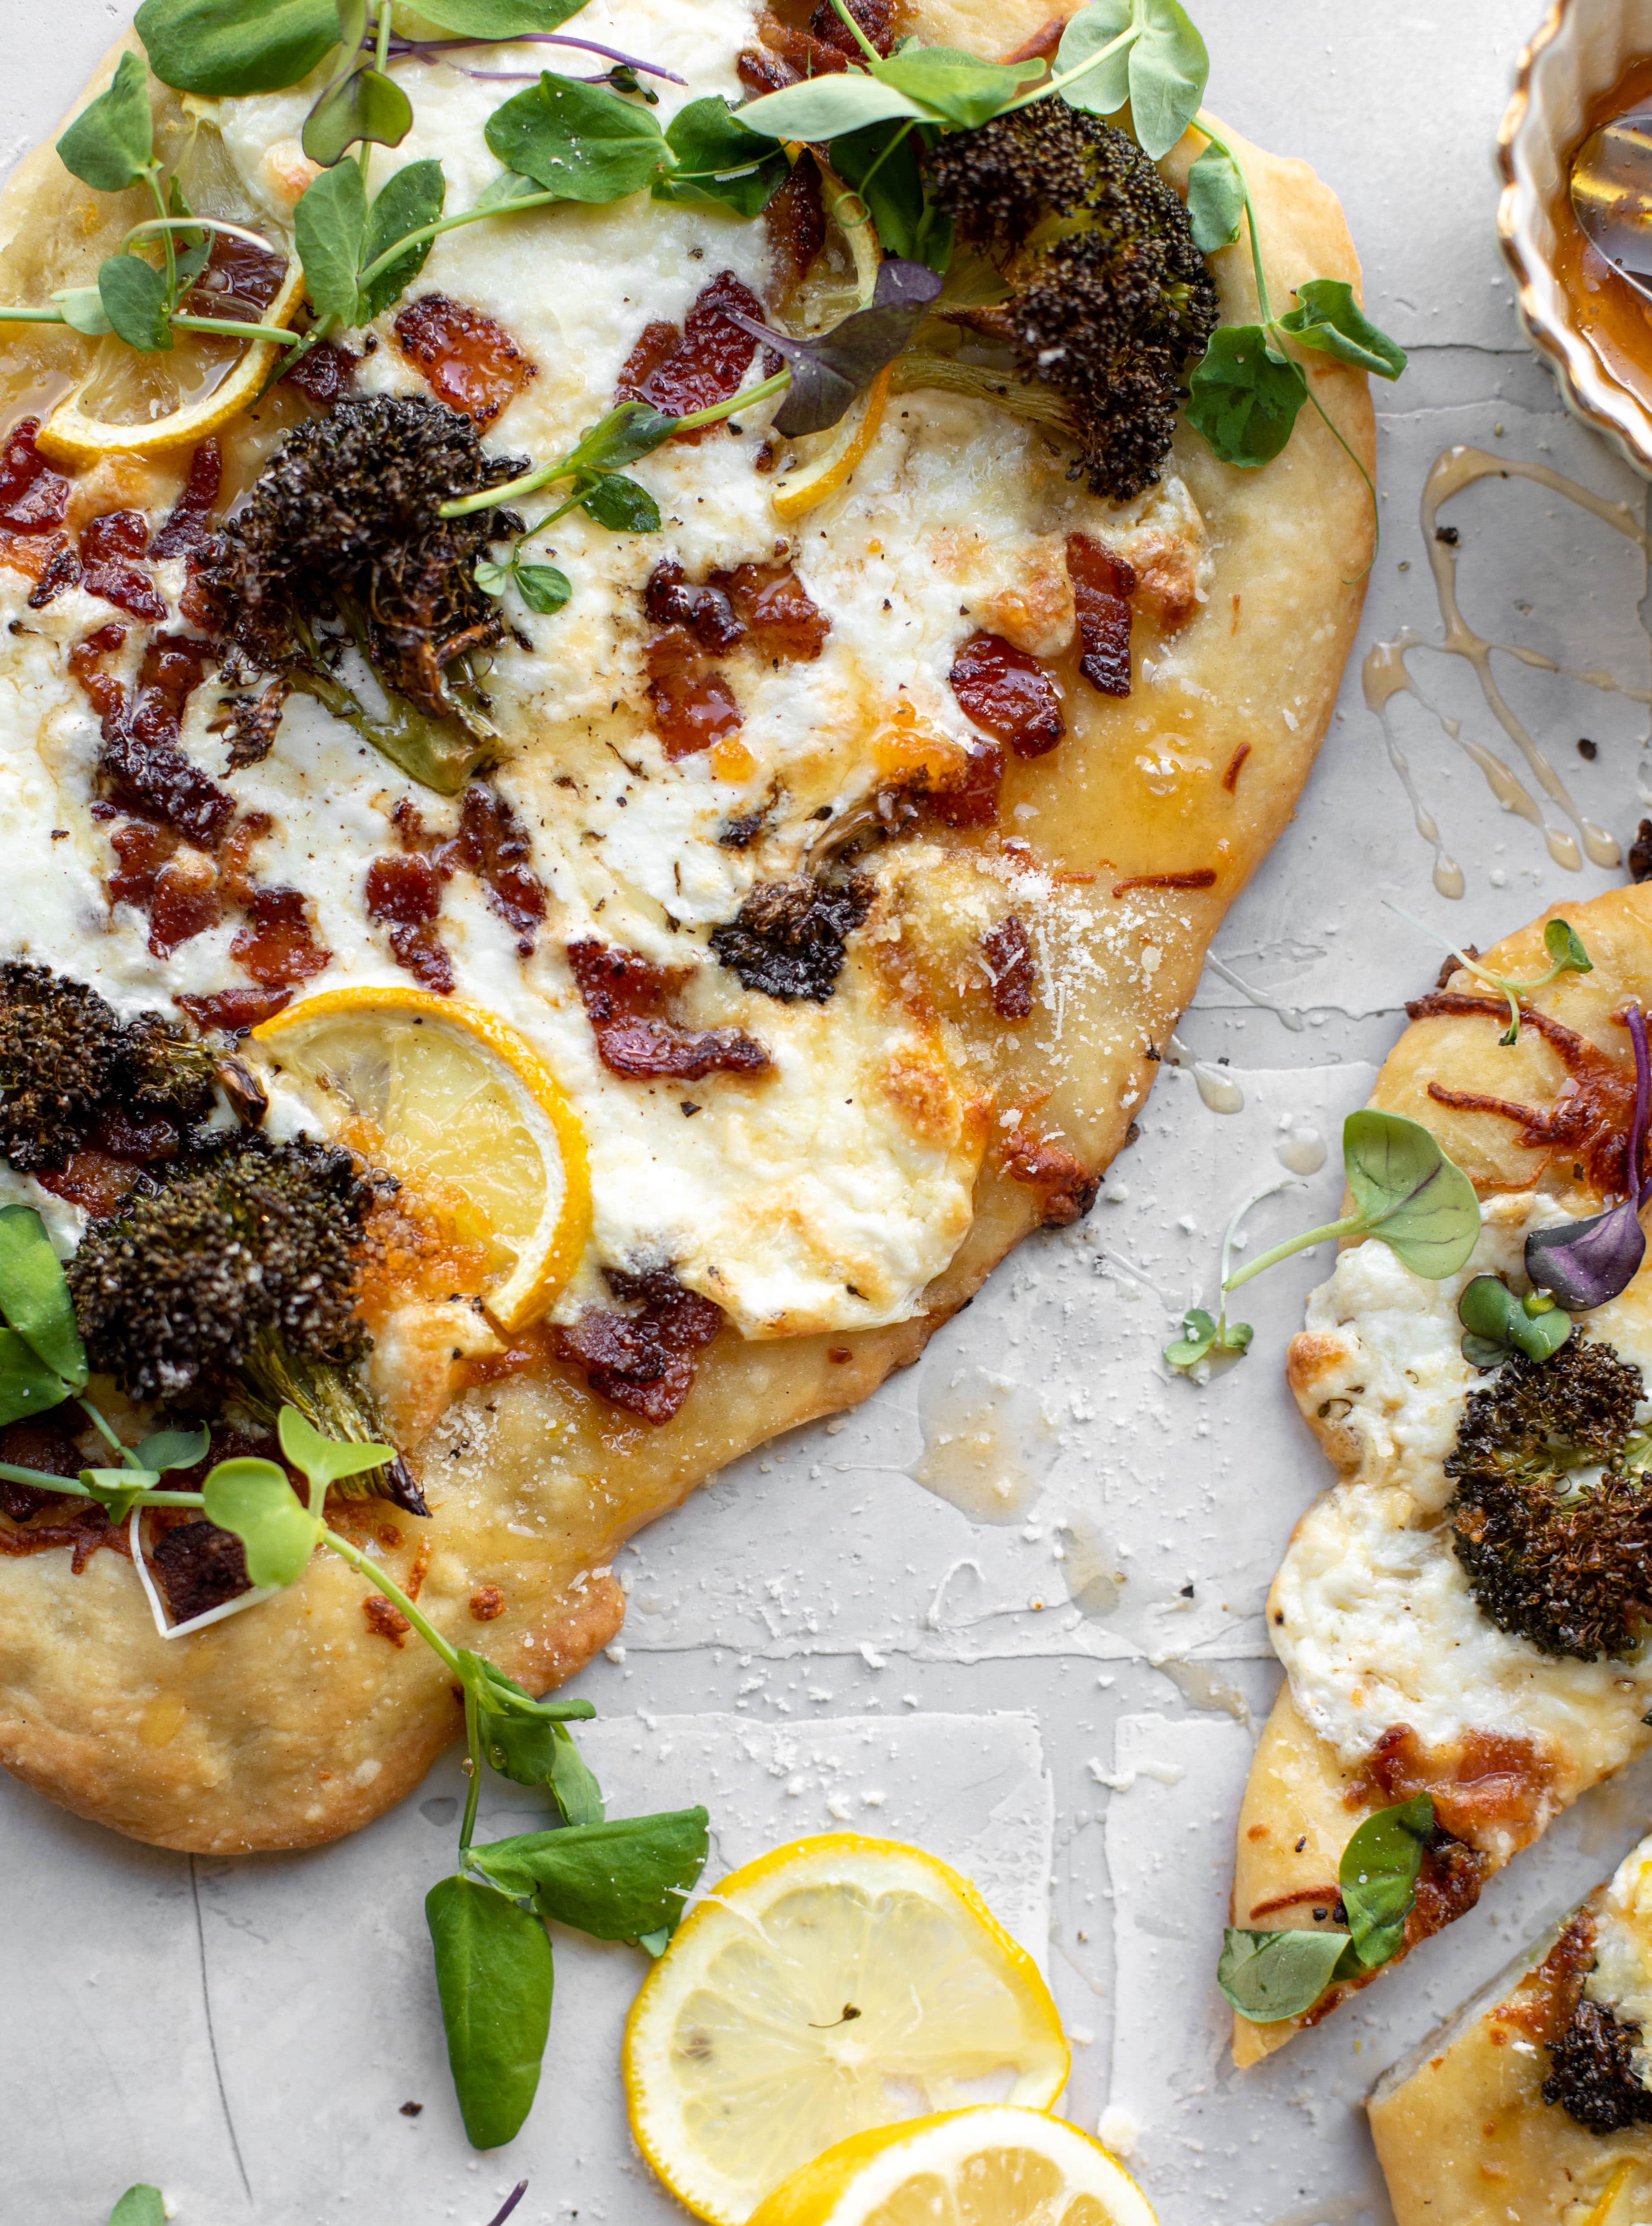 This cheesy lemon flatbread pizza is covered with burrata cheese, parmesan, roasted vegetables and hot honey. It's a flavor dream!